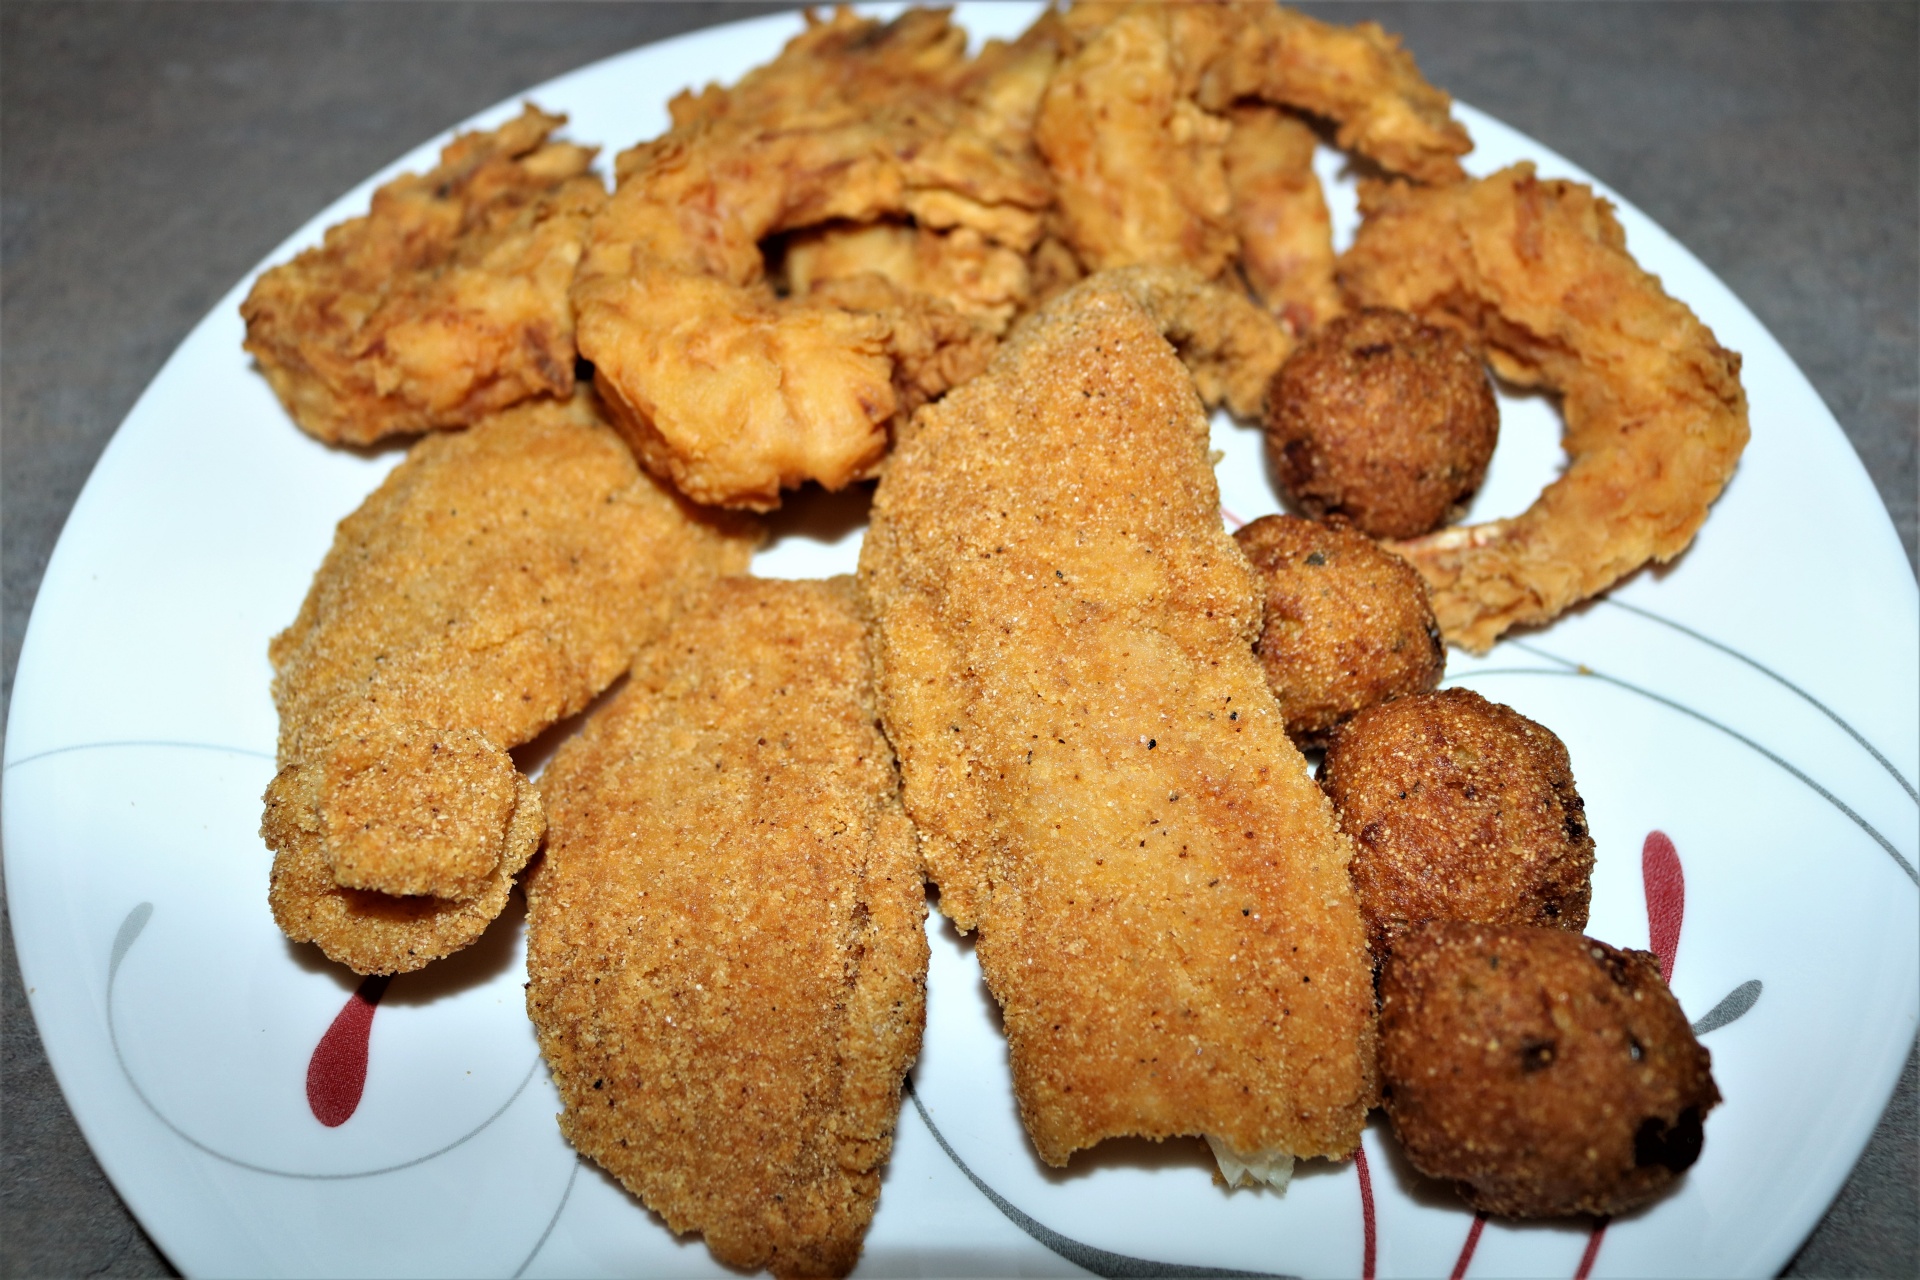 Fried Fish And Shrimp On Plate